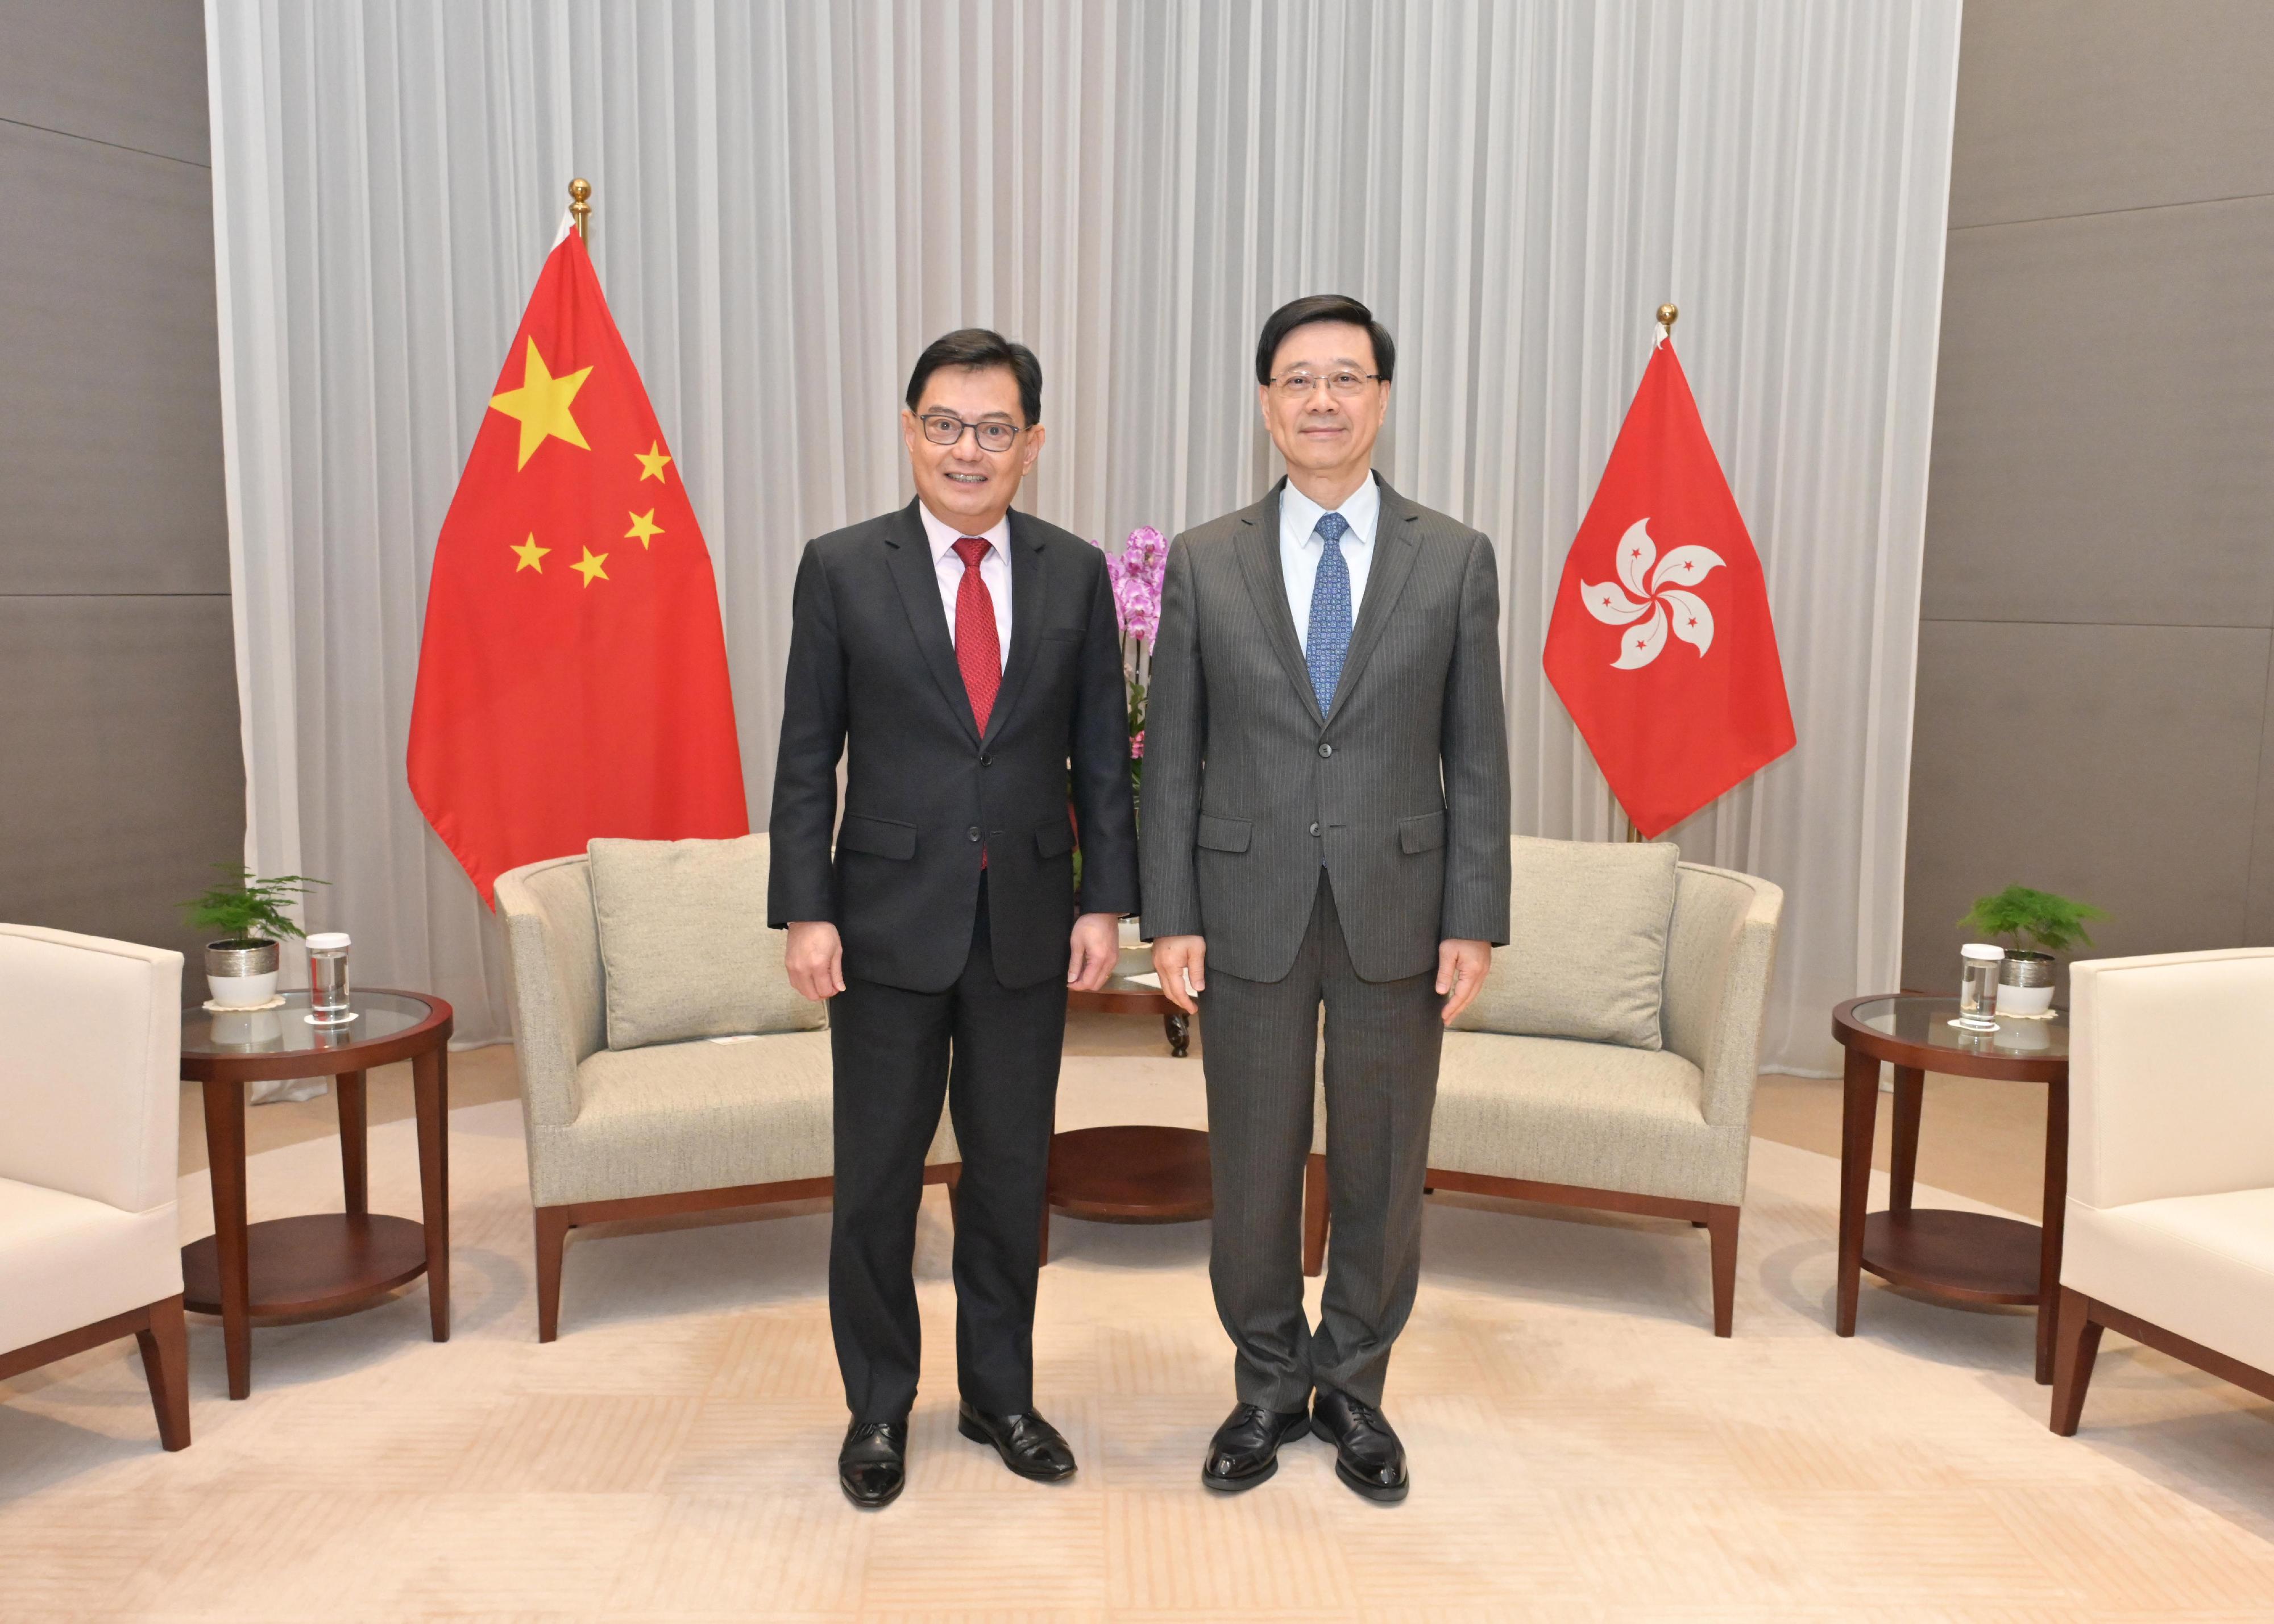 The Chief Executive, Mr John Lee (right), today (April 12) meets with the Deputy Prime Minister and Coordinating Minister for Economic Policies of Singapore, Mr Heng Swee Keat (left).